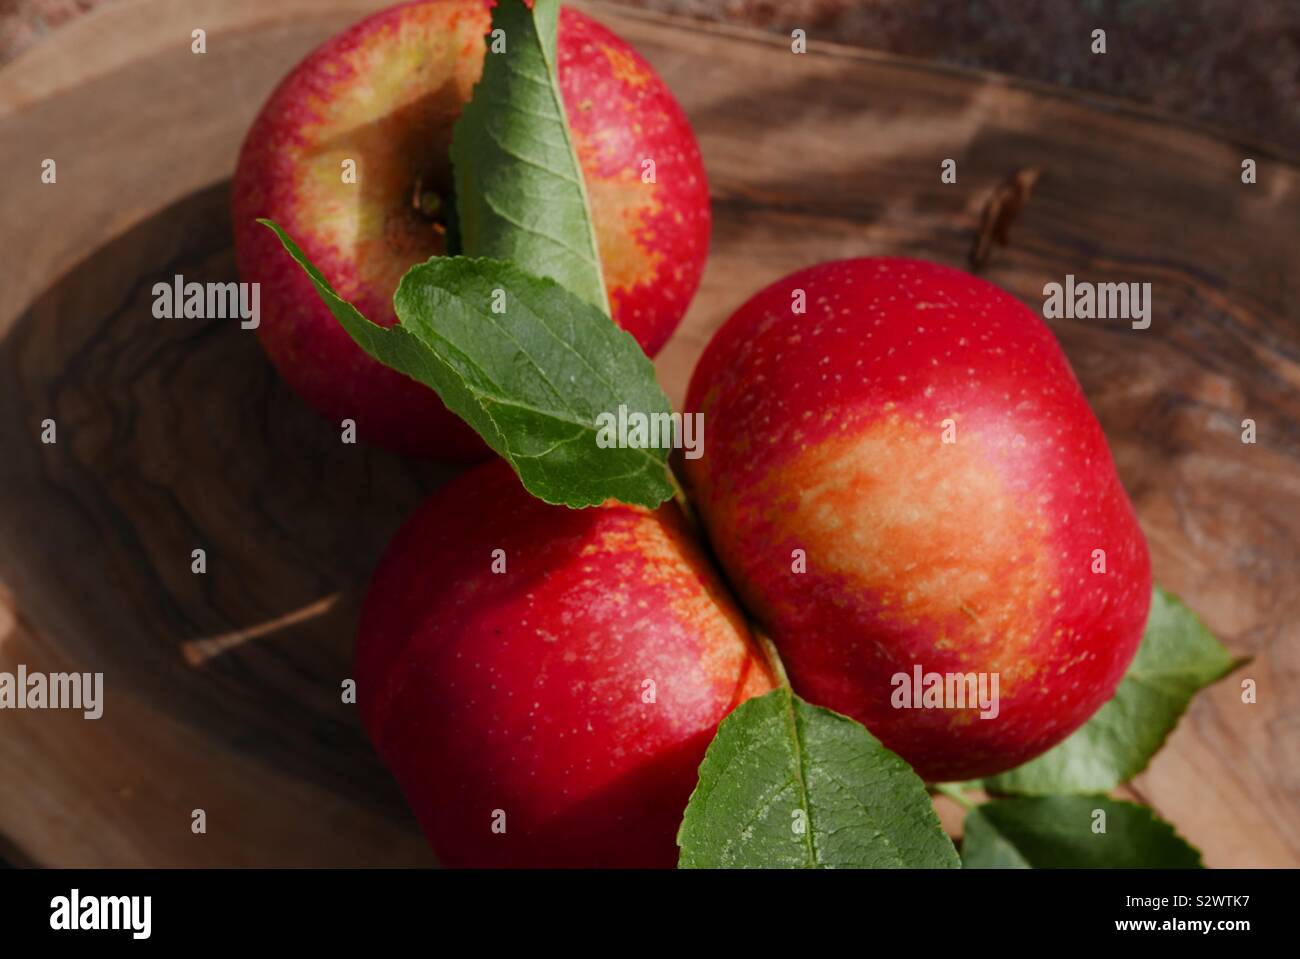 Close up of three red apples on a wooden board with leaves Stock Photo